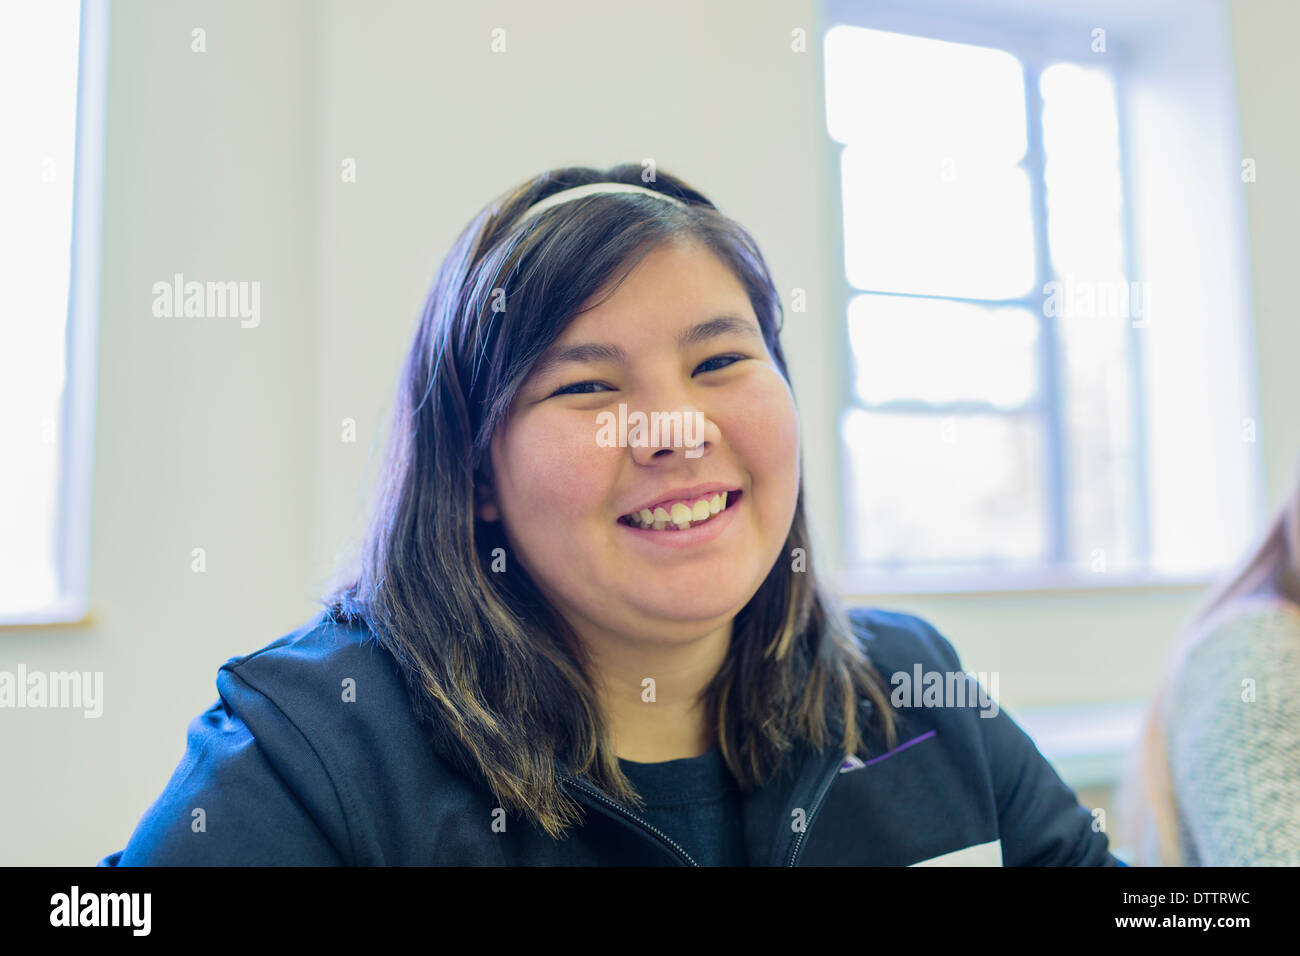 Native American Student smiling in class Banque D'Images